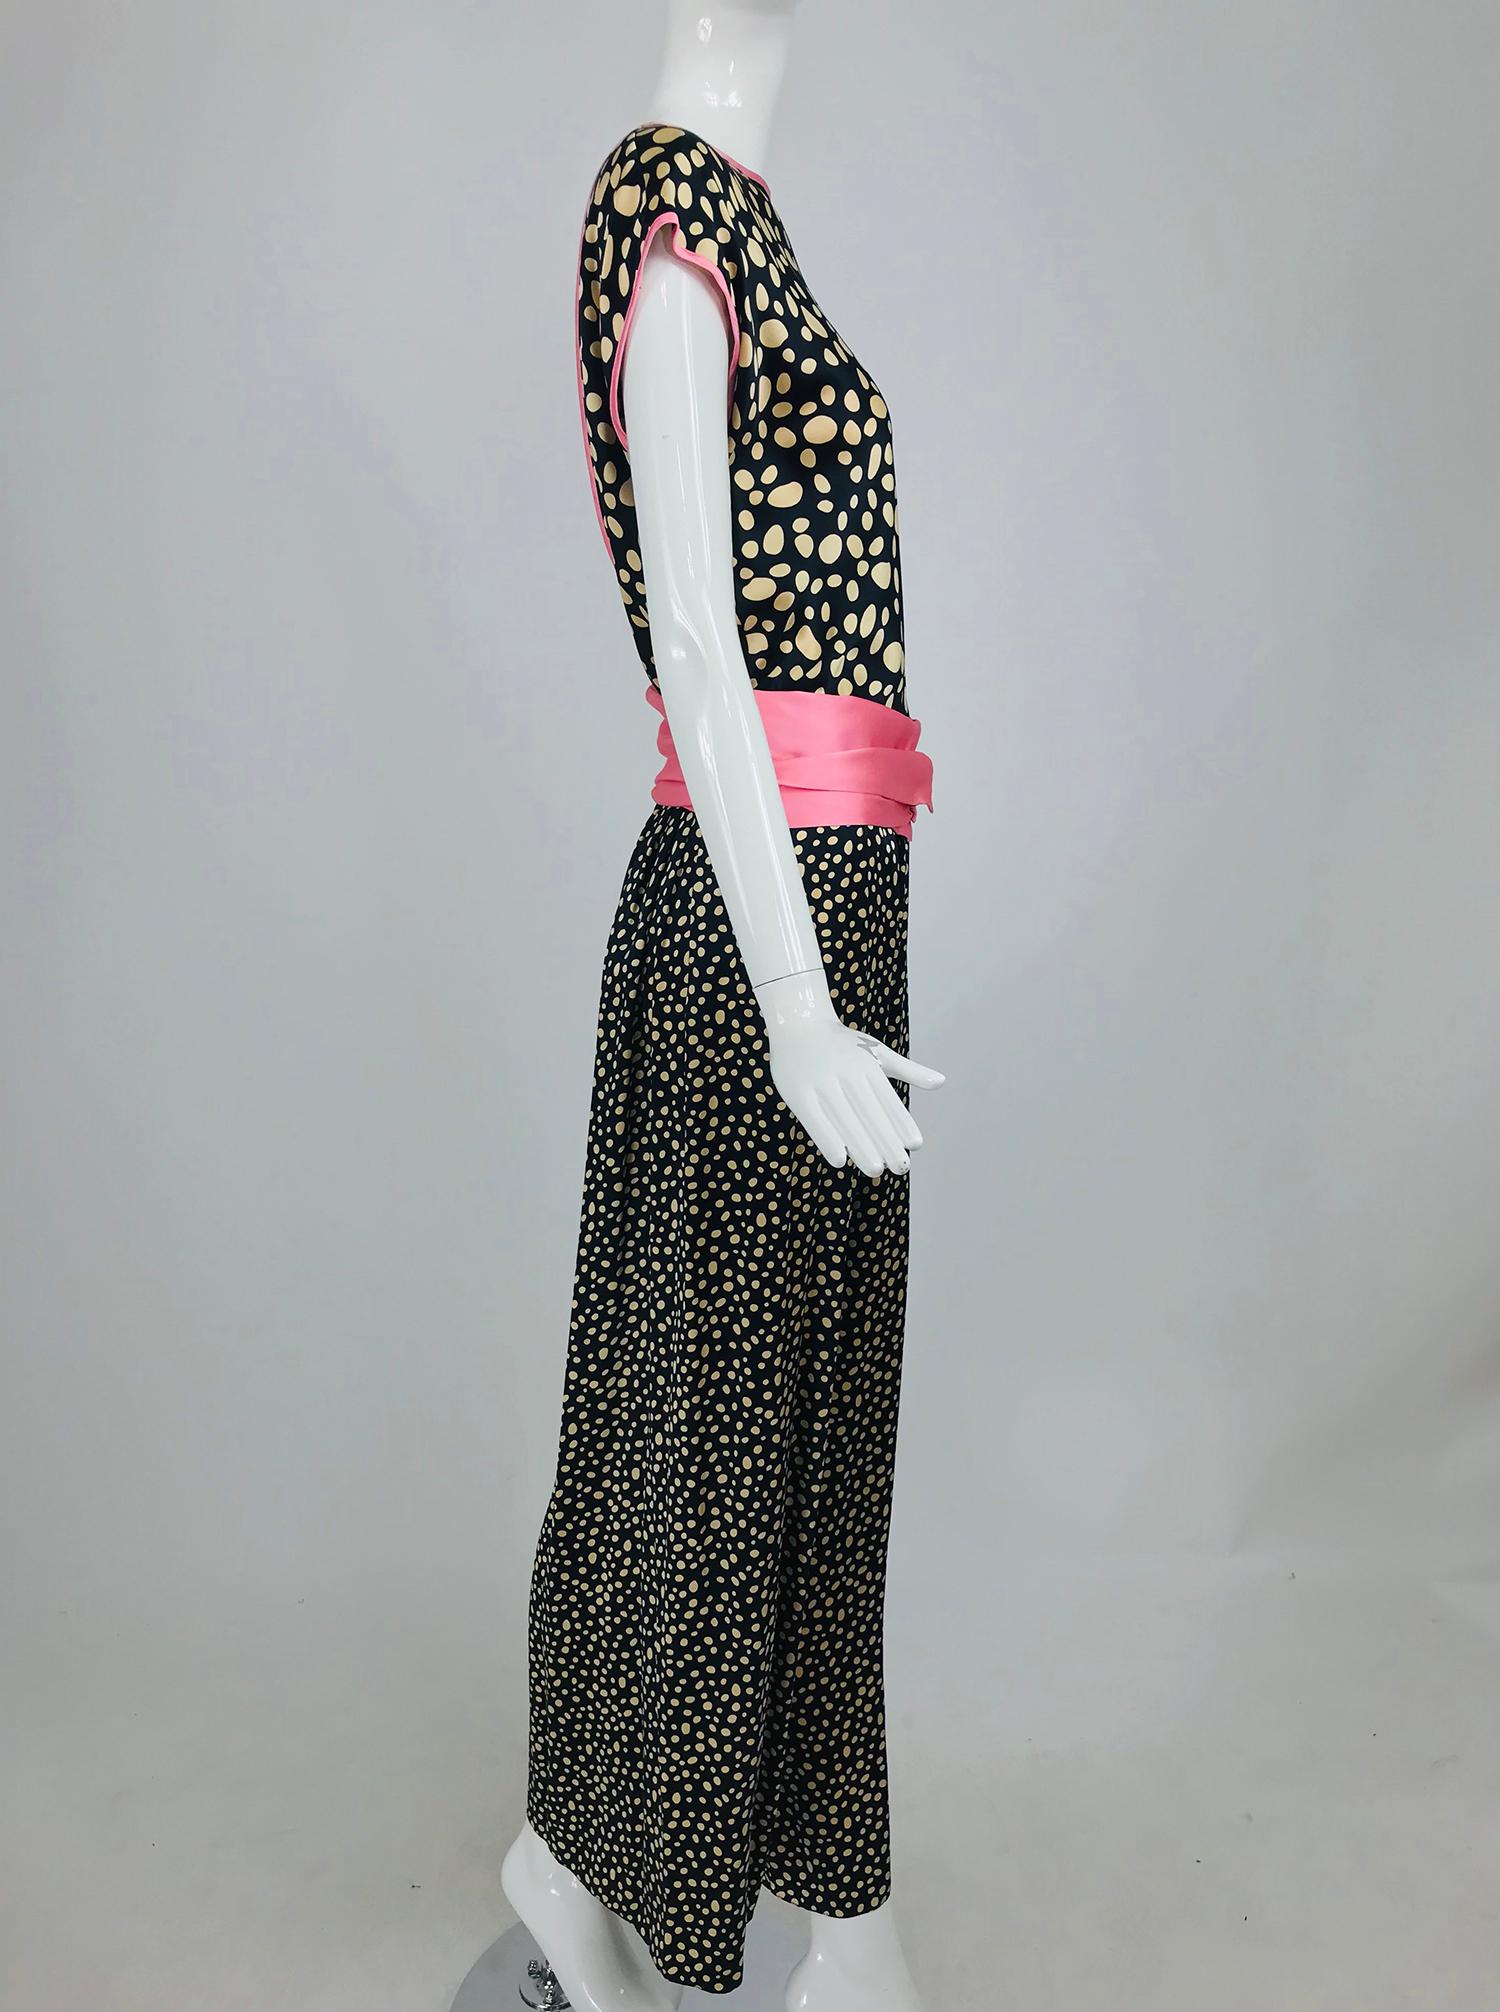 Women's Guy Laroche Silk Evening Pajama set in Cream and Black Dots Pink Trim 1990s For Sale